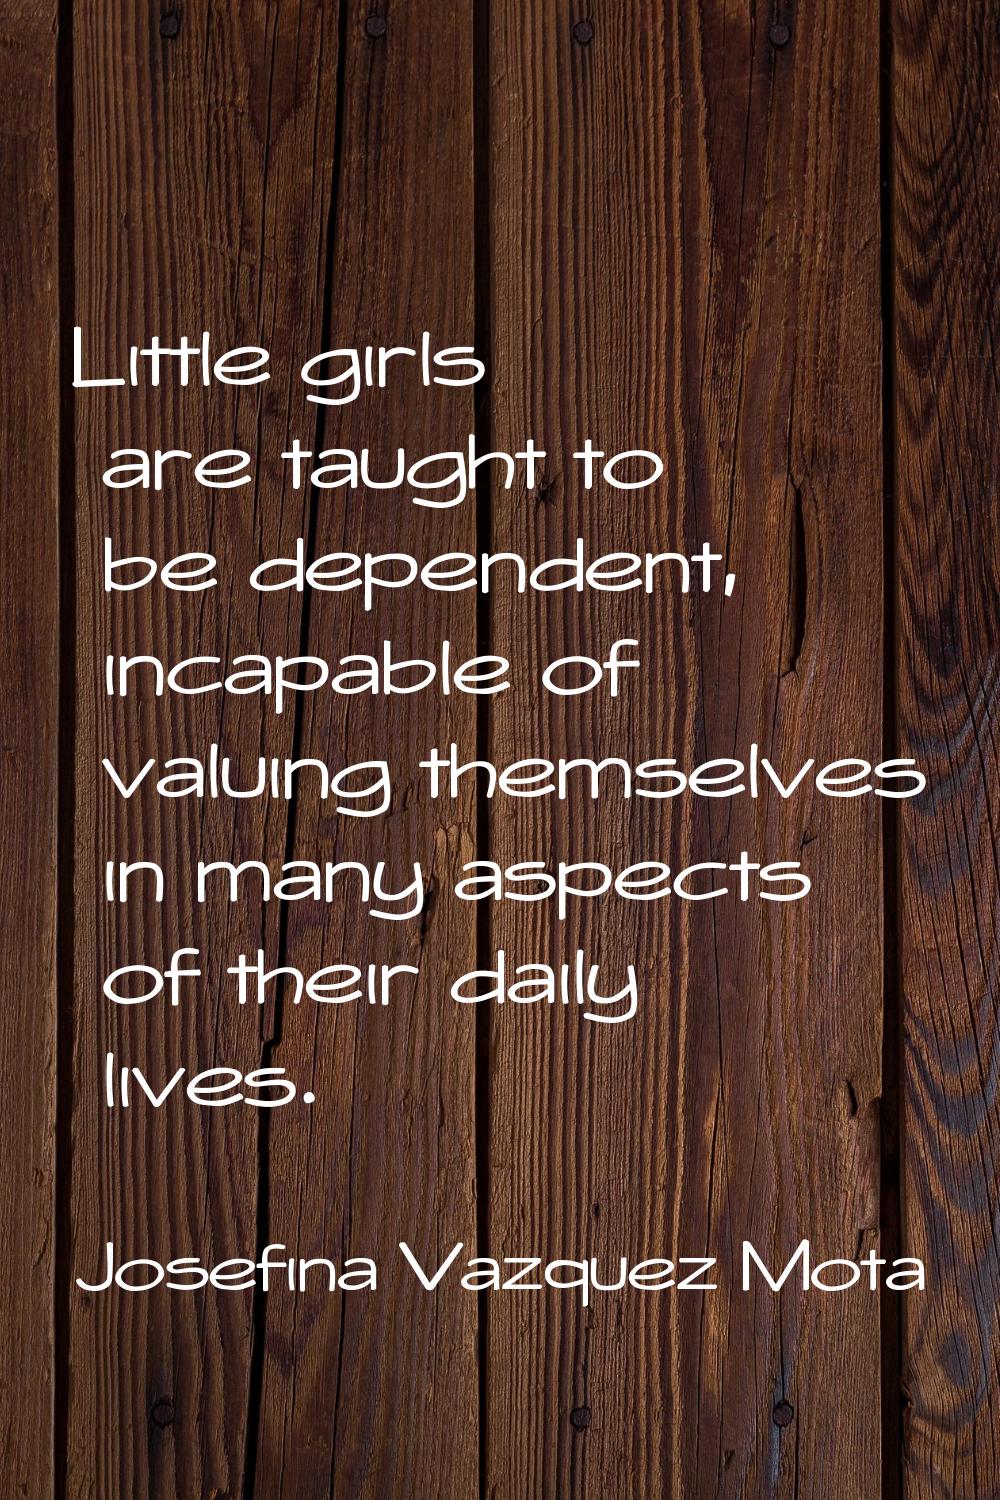 Little girls are taught to be dependent, incapable of valuing themselves in many aspects of their d